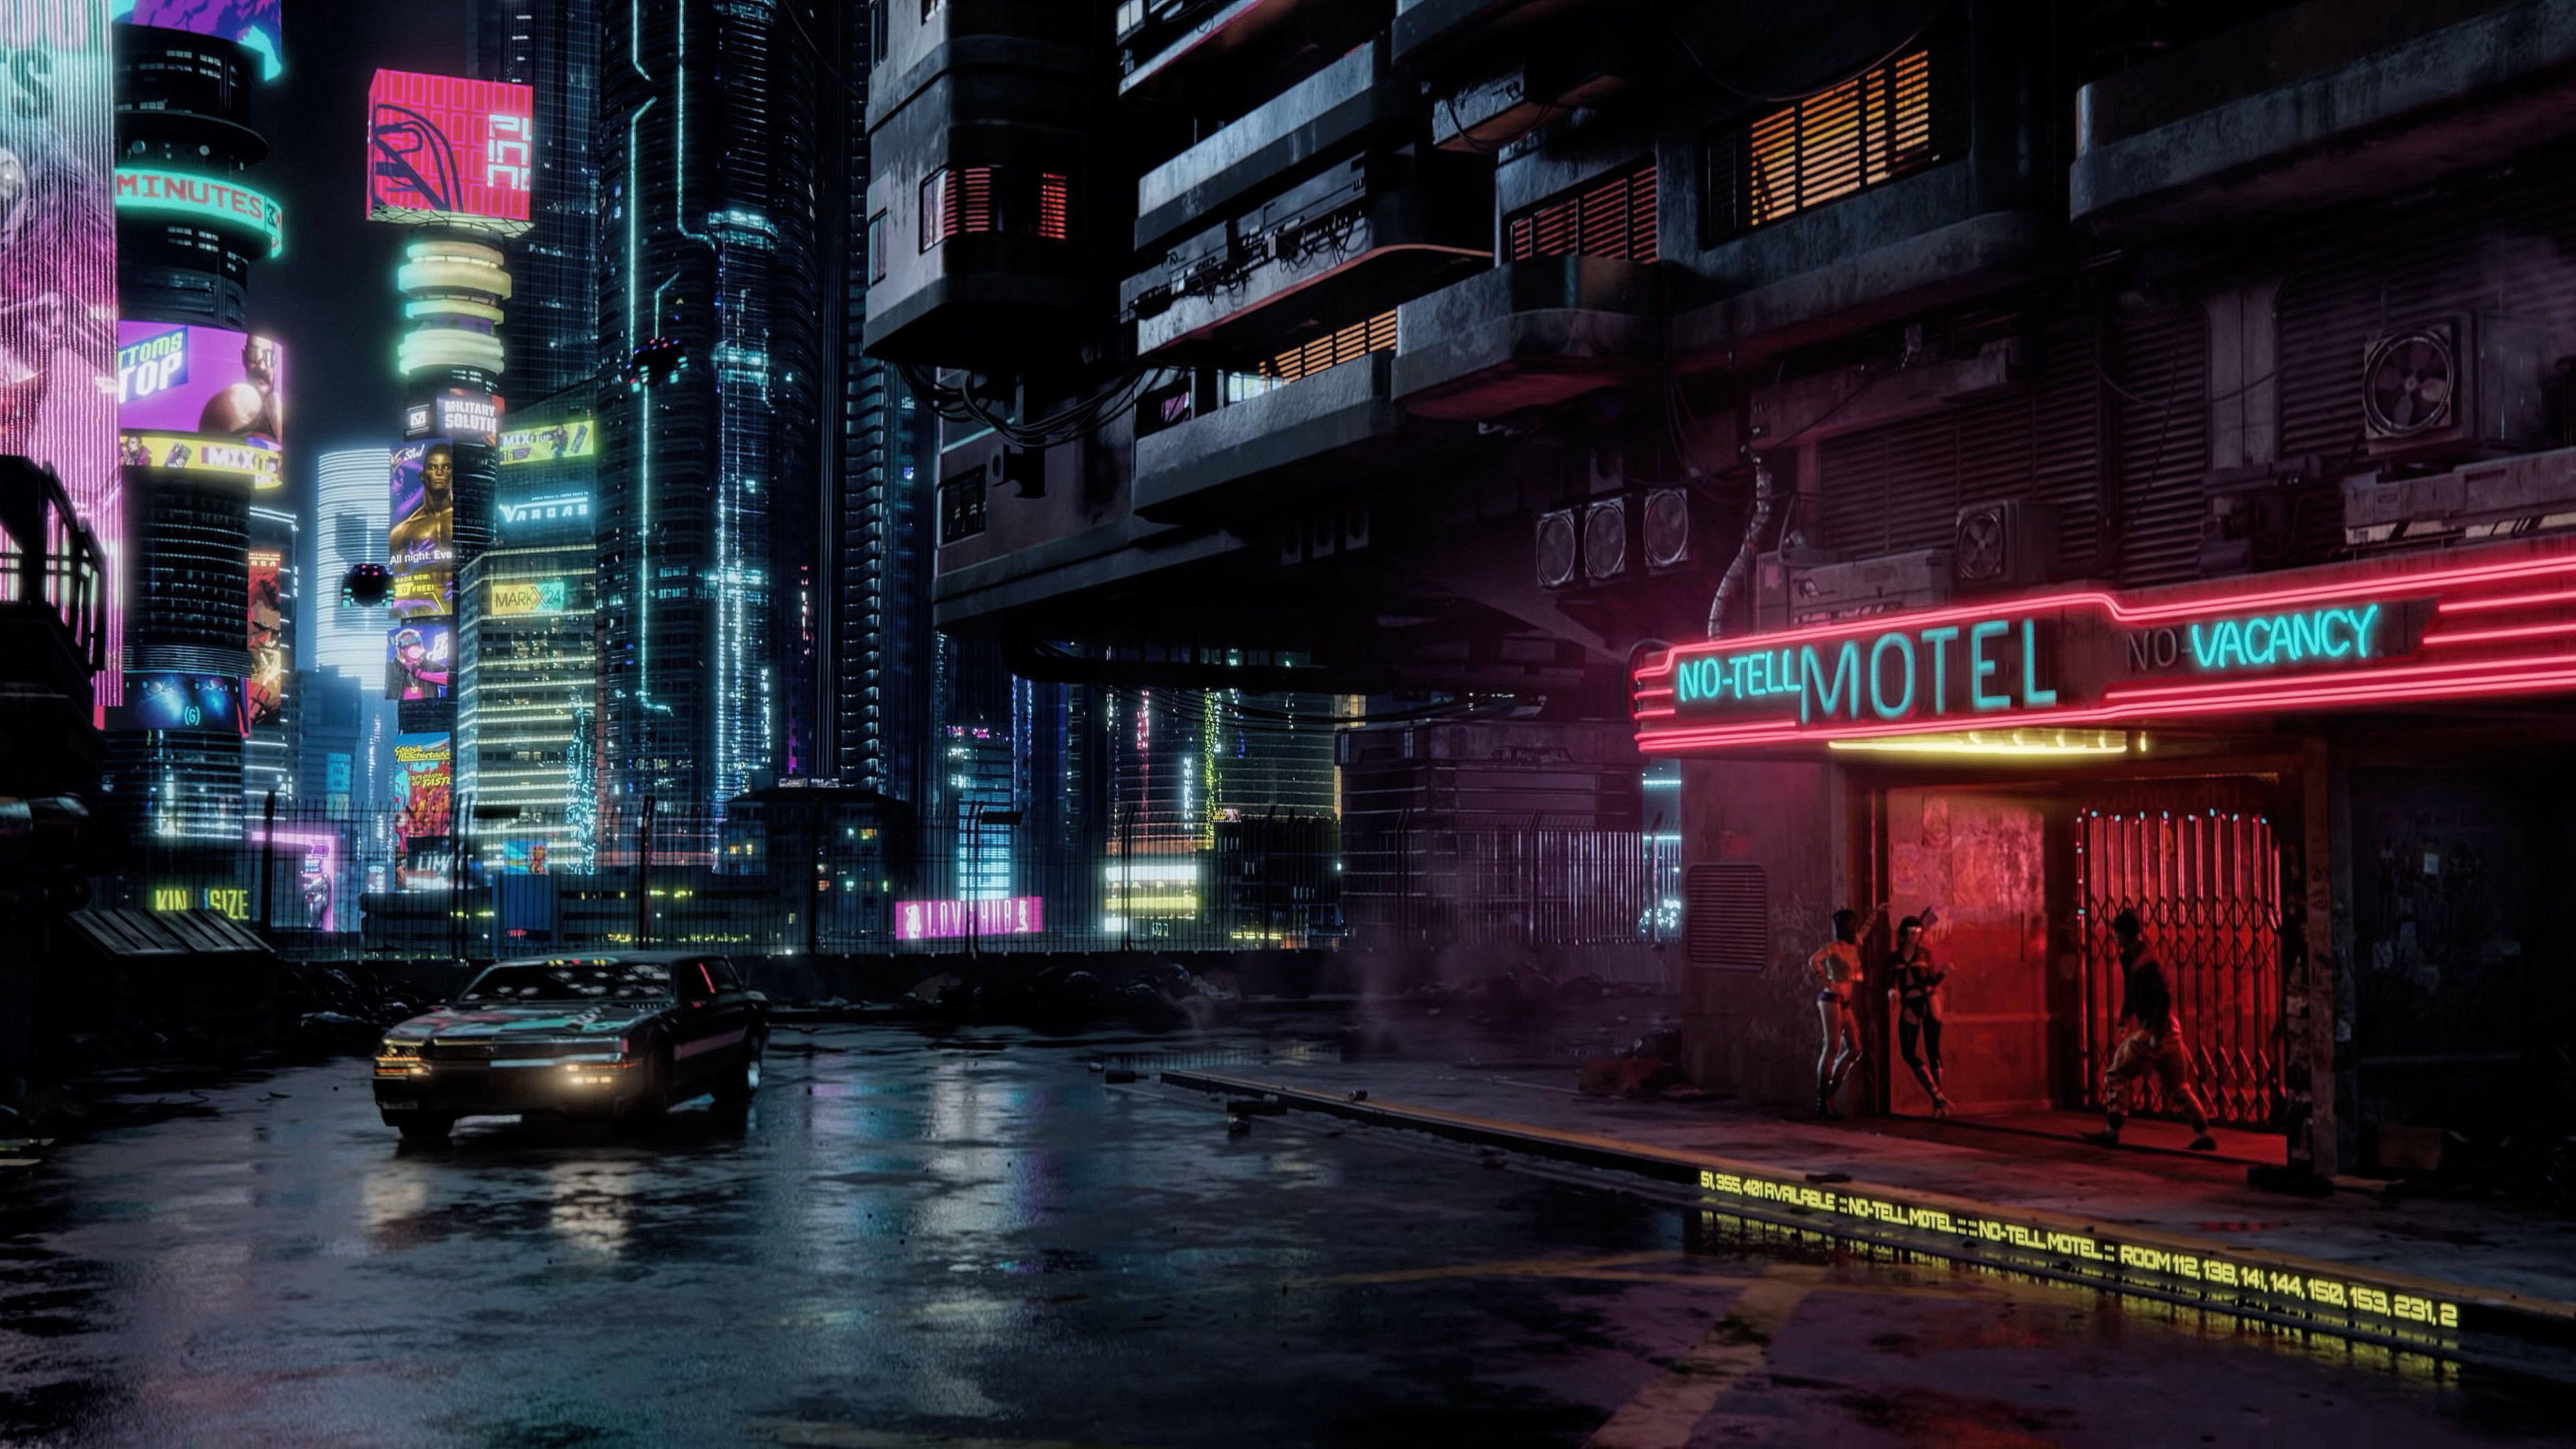 Cyberpunk 2077 Your Night City Wallpapers